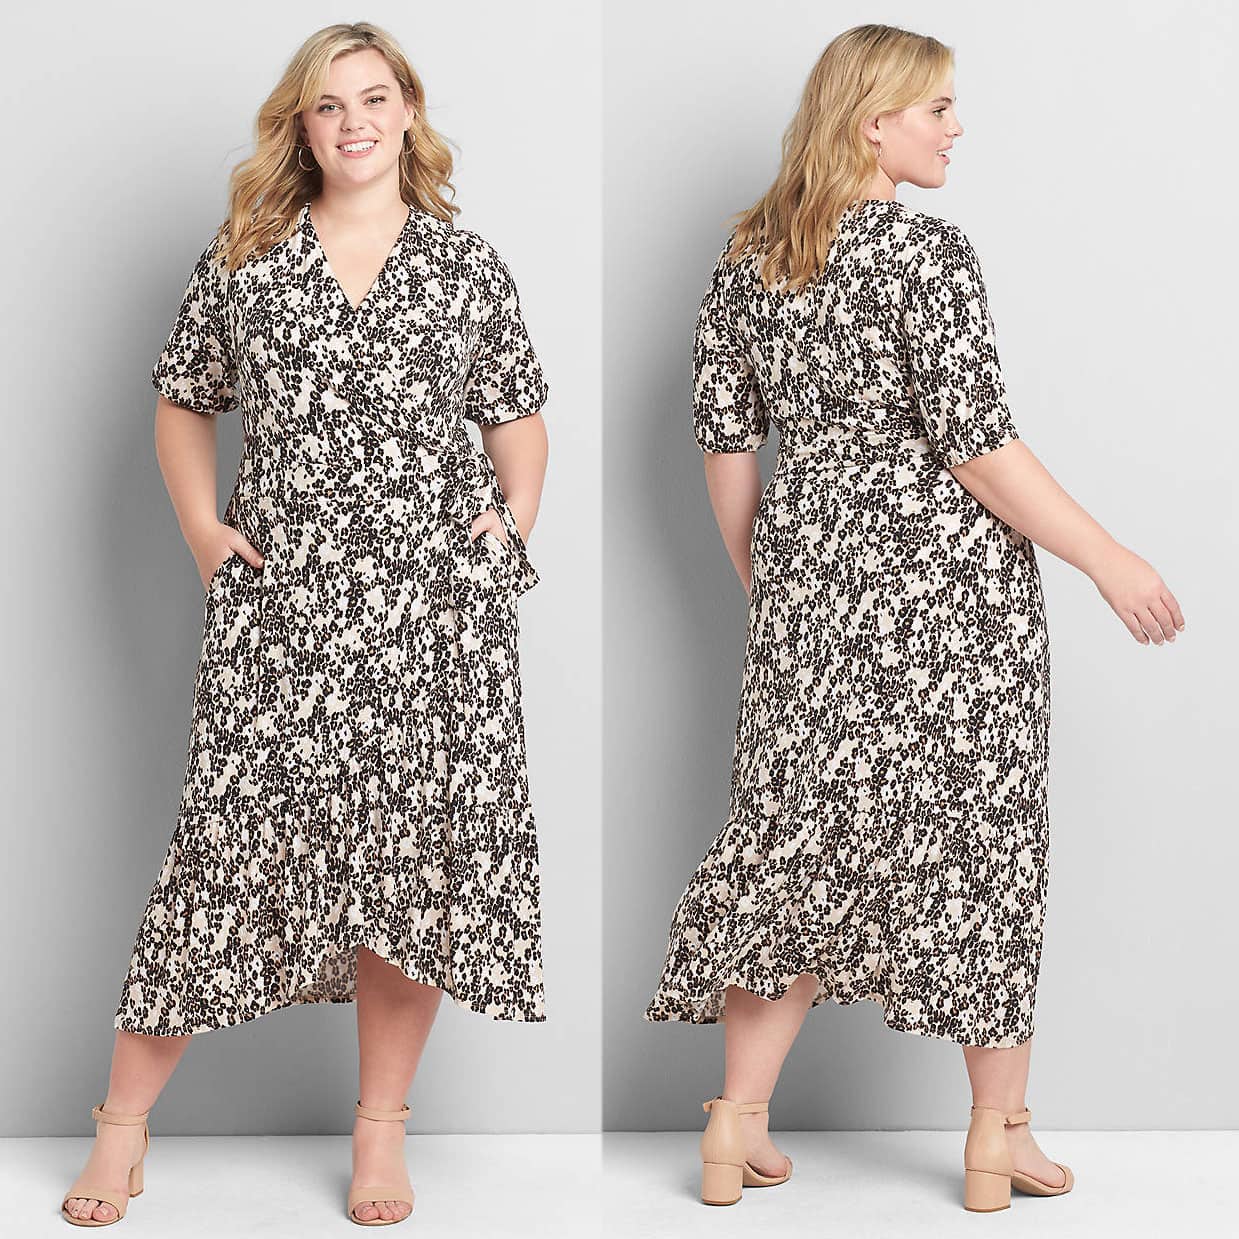 Lane Bryant's floral midi dress has a flattering faux-wrap silhouette, a v-neck, and a flowy wide ruffle along the hem